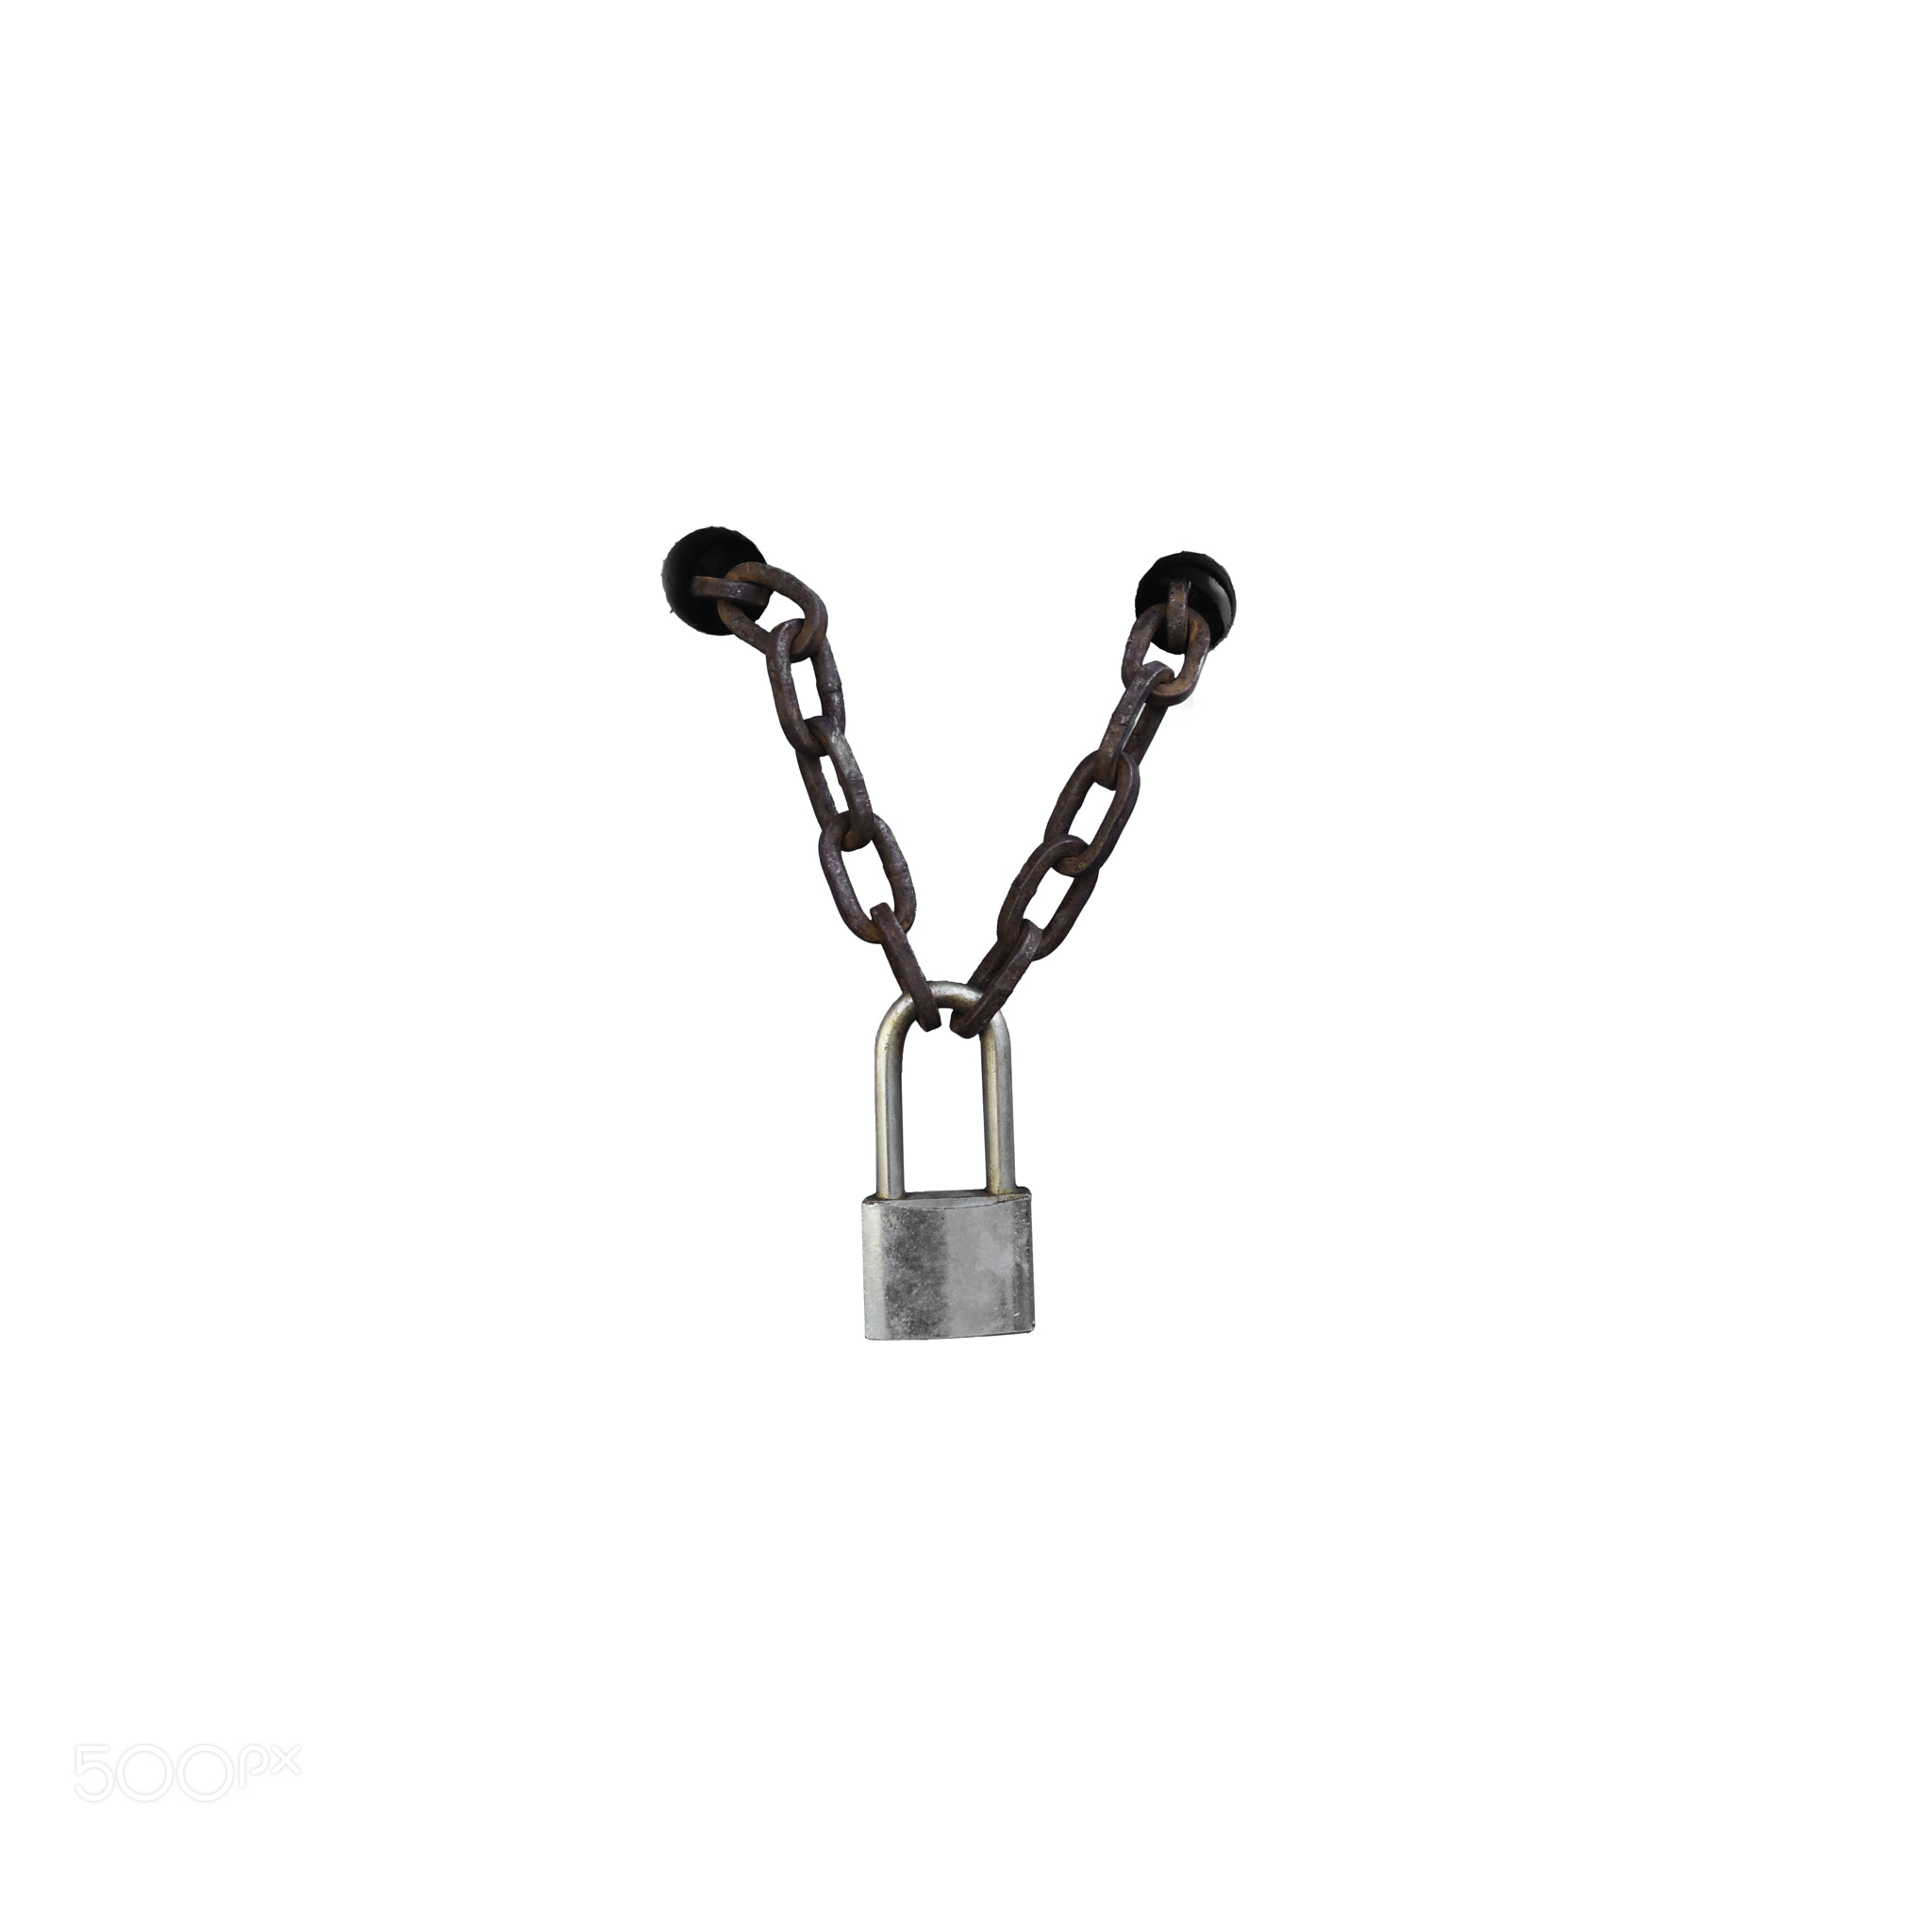 padlock with chain isolated on white background